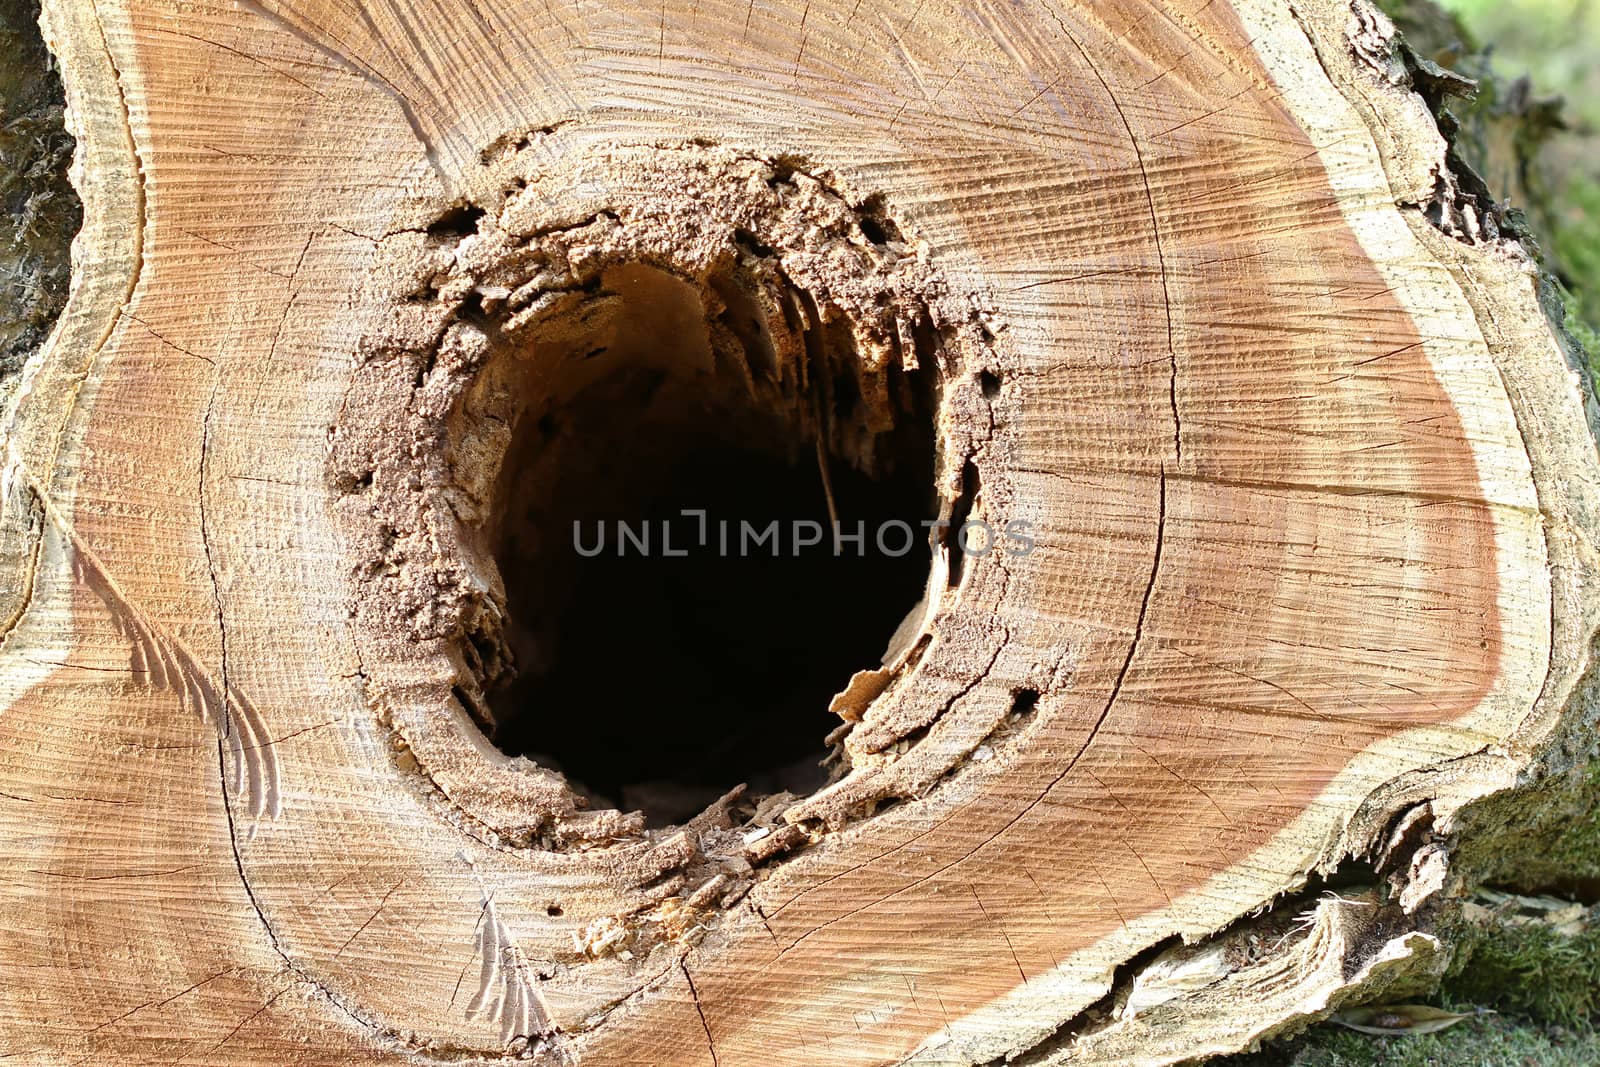 Detail of the cut tree trunk - a hole in wood